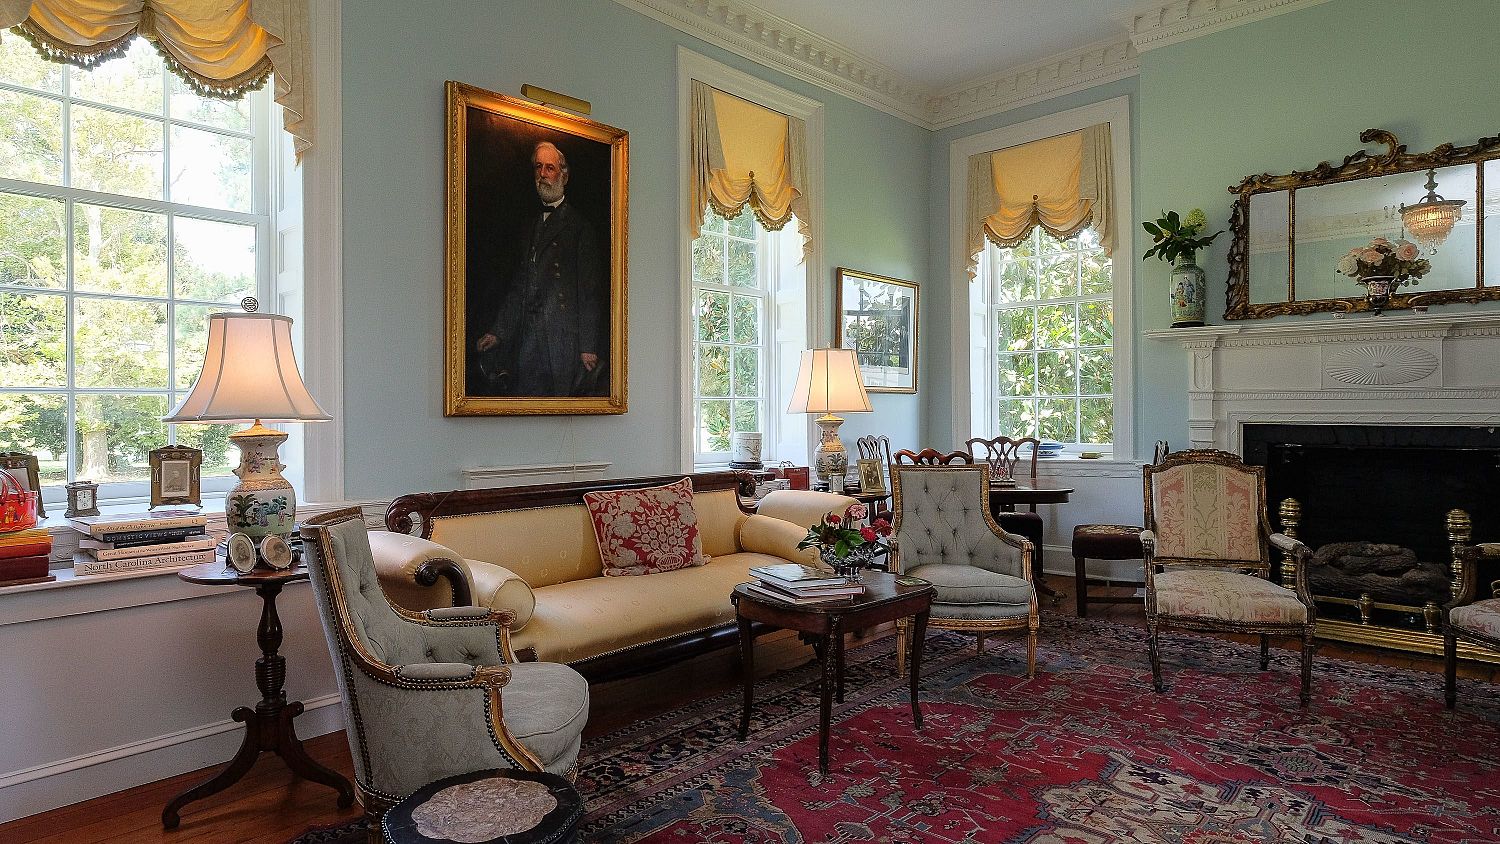 The living room of the Mulberry Hill manor house